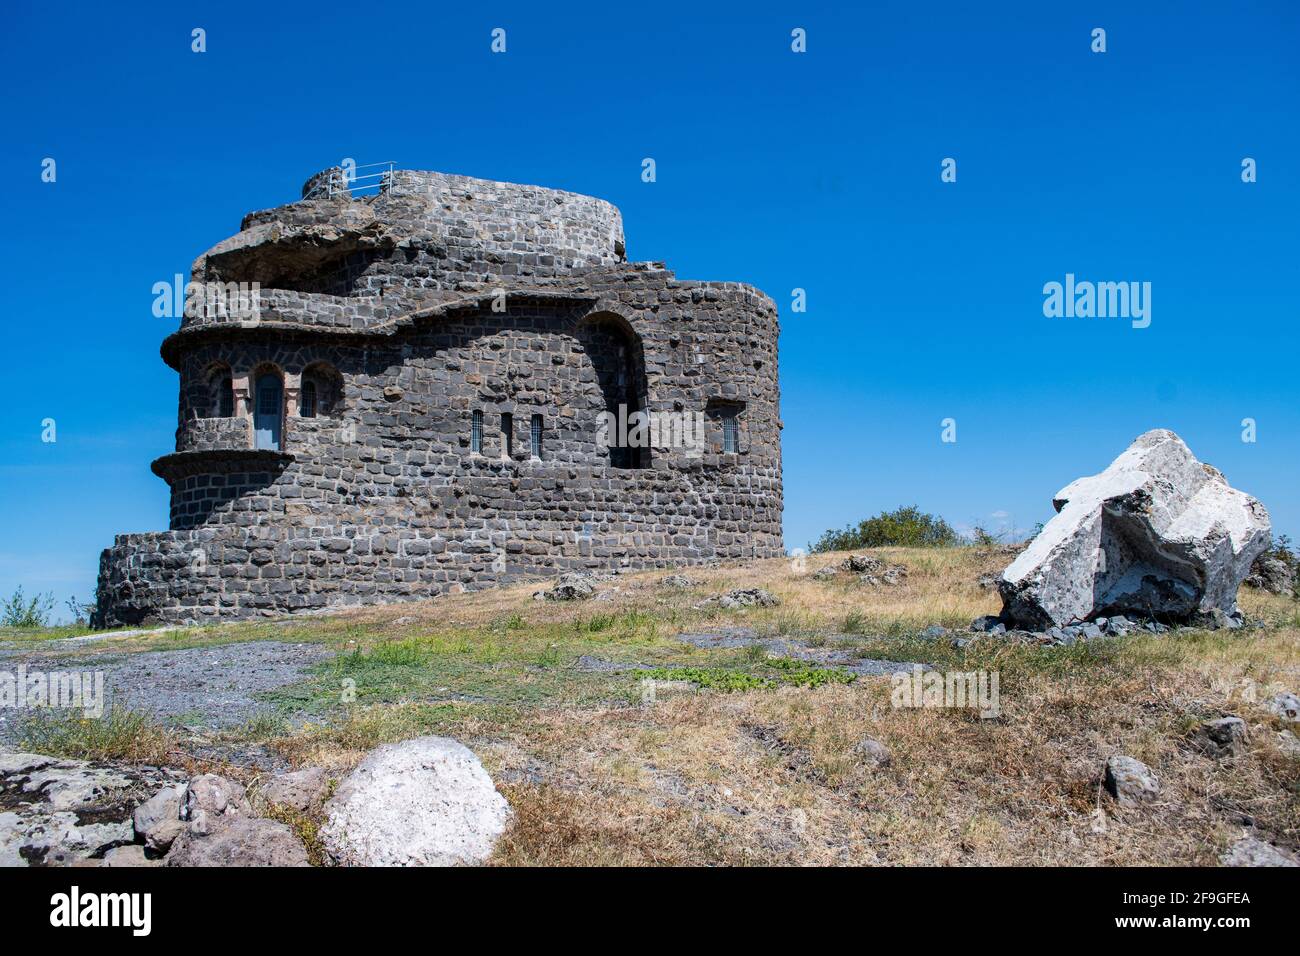 Zebrnjak monument is was built in 1937, for the 25th anniversary of the Battle of Kumanovo which took place on 1912 during the First Balkan War. Stock Photo